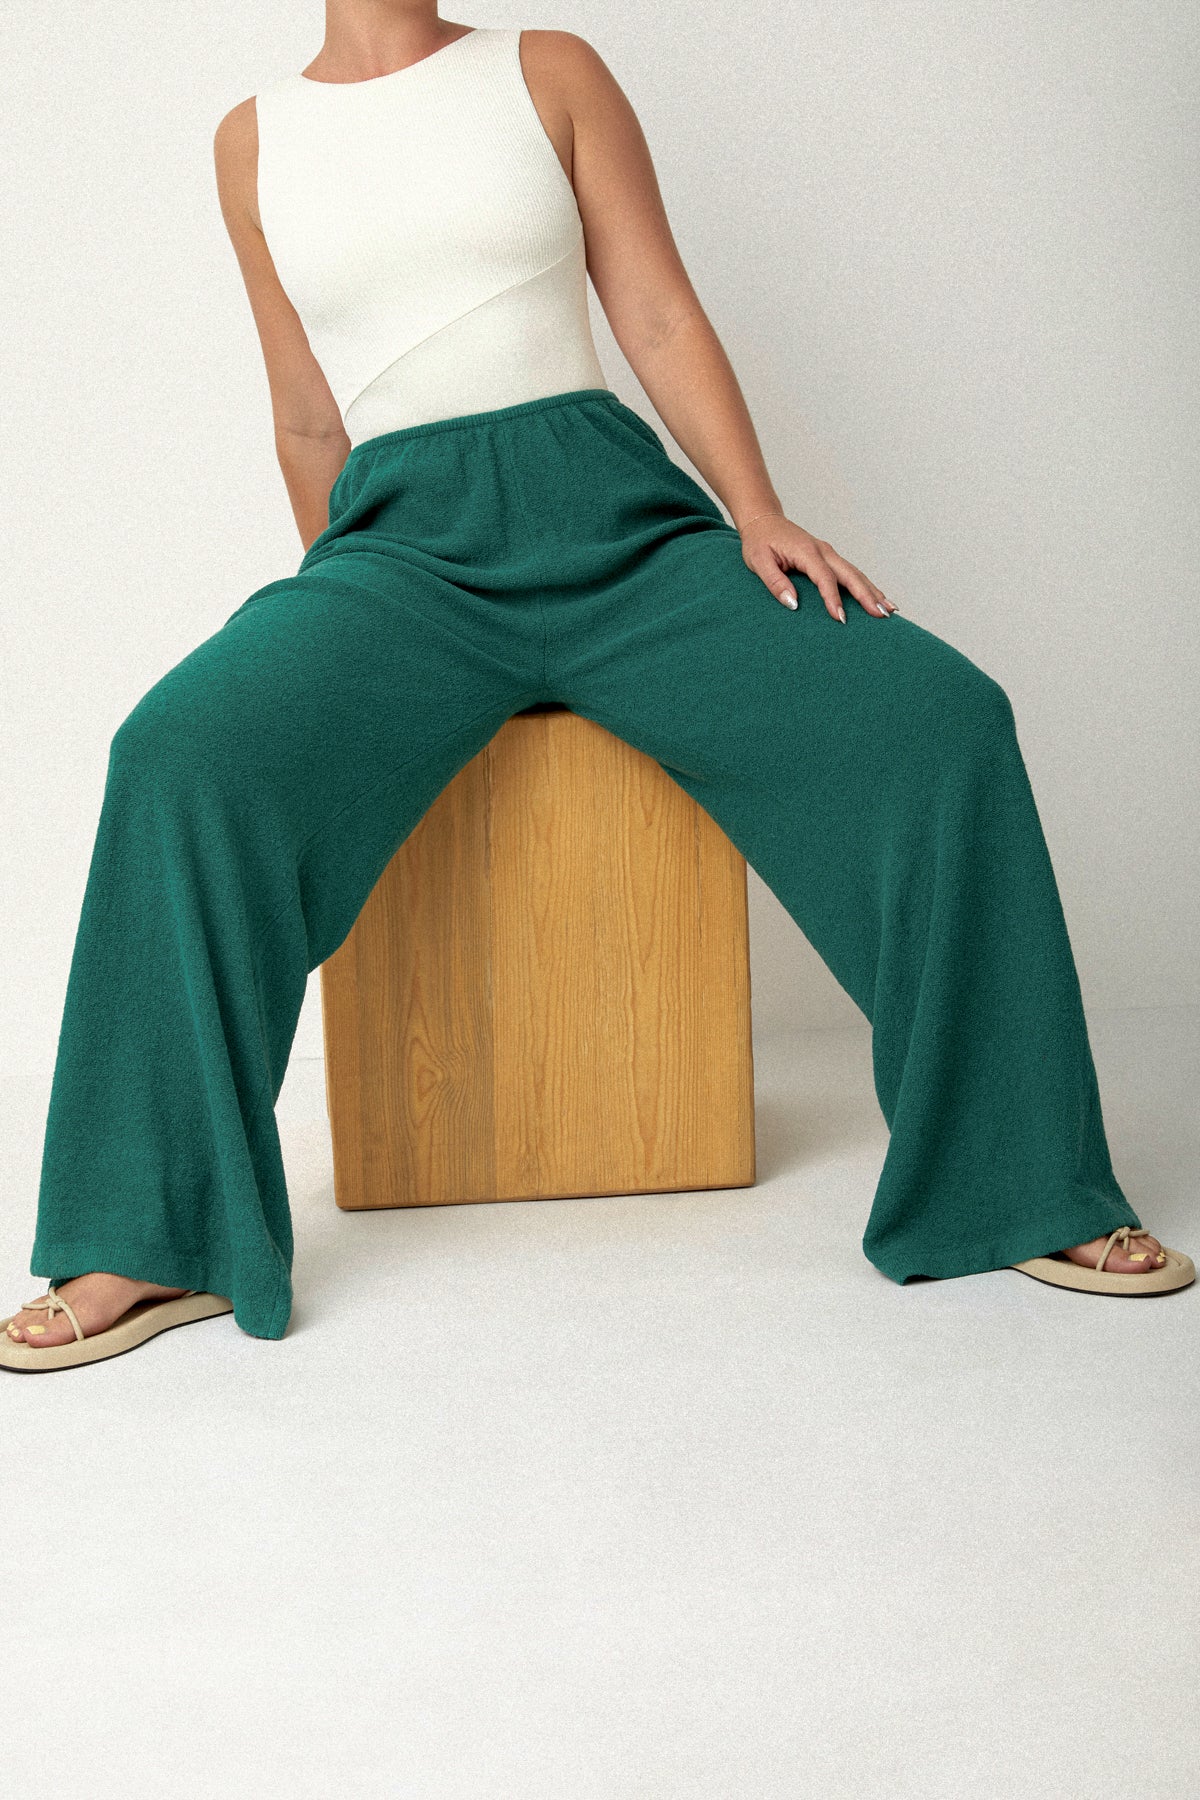 Forest Cotton Wool Blend Knit Pant